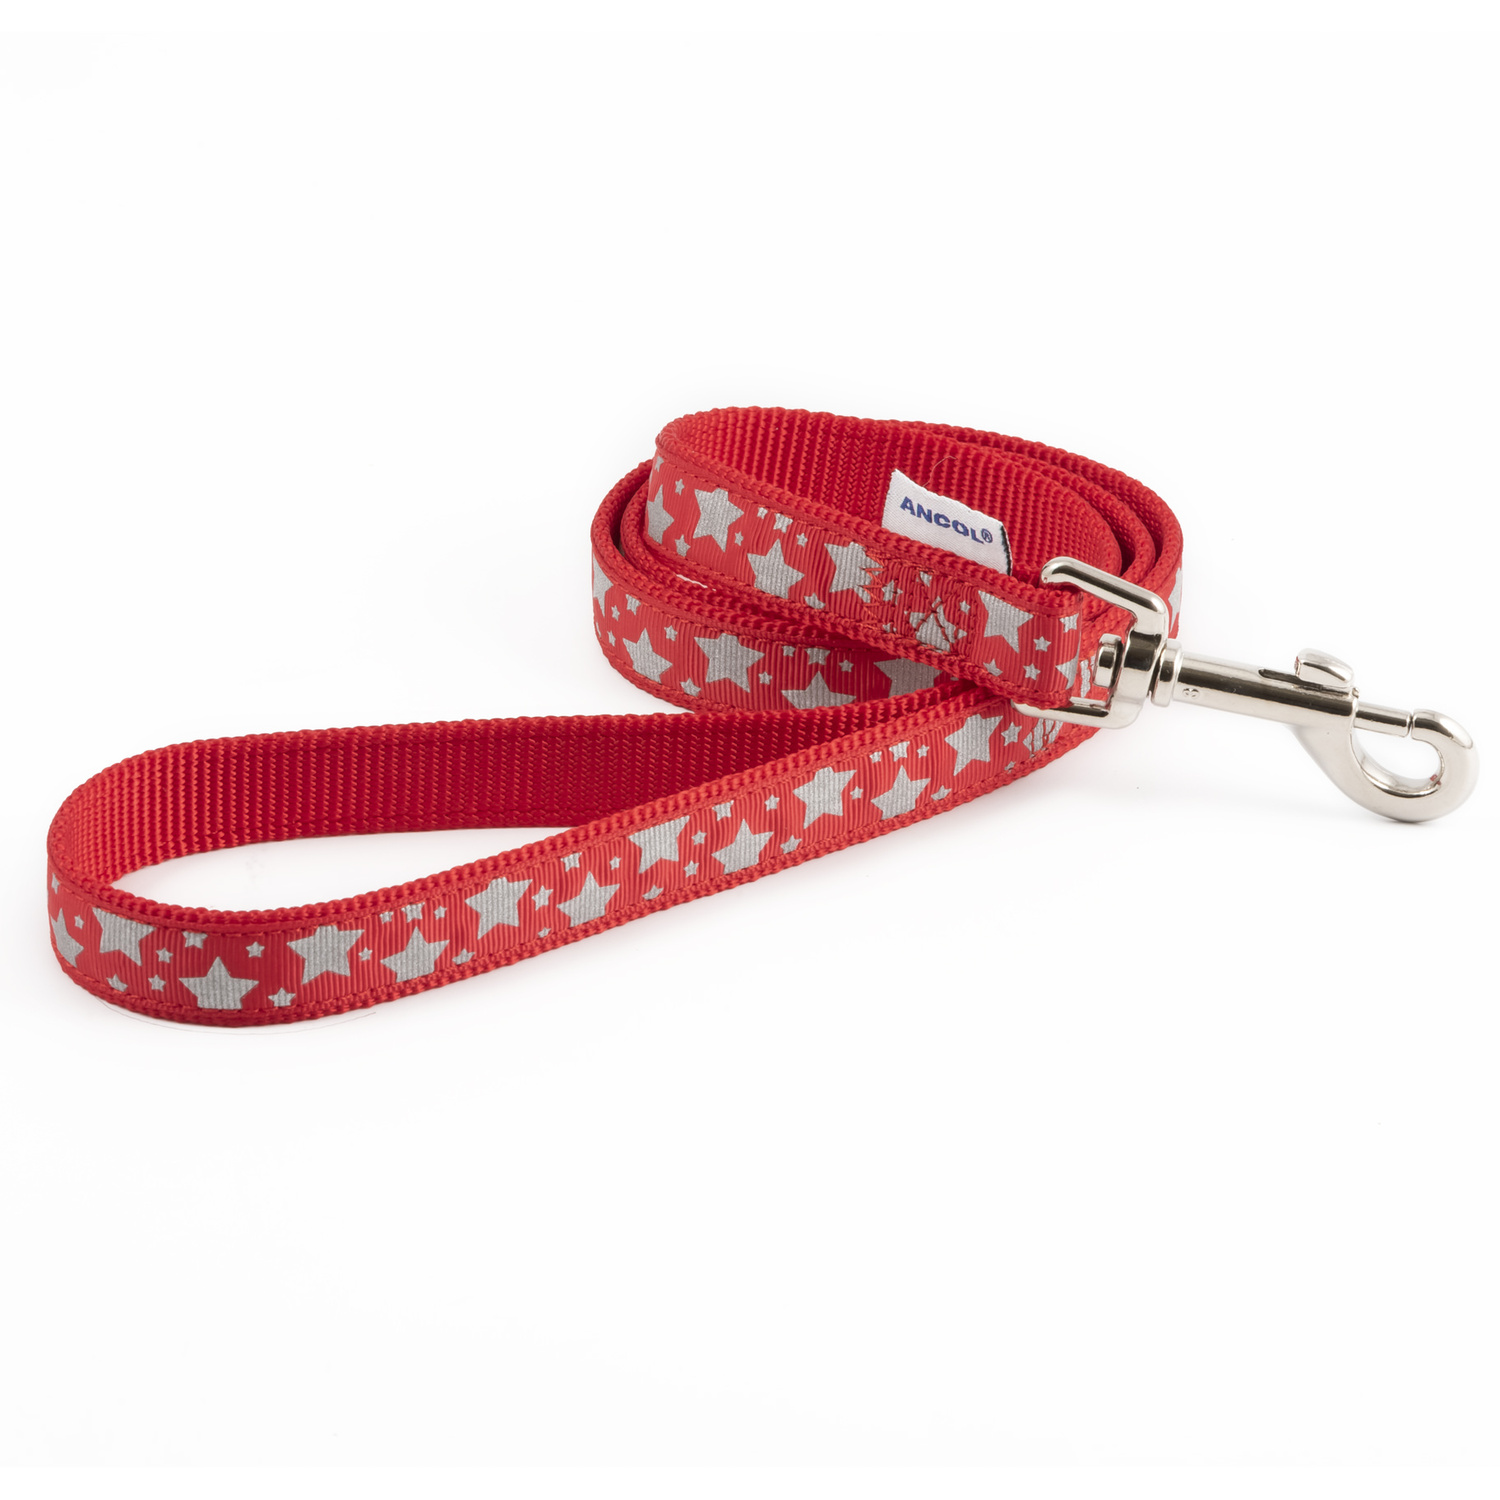 Ancol Reflective Stars Dog Lead 1m - Red Image 2